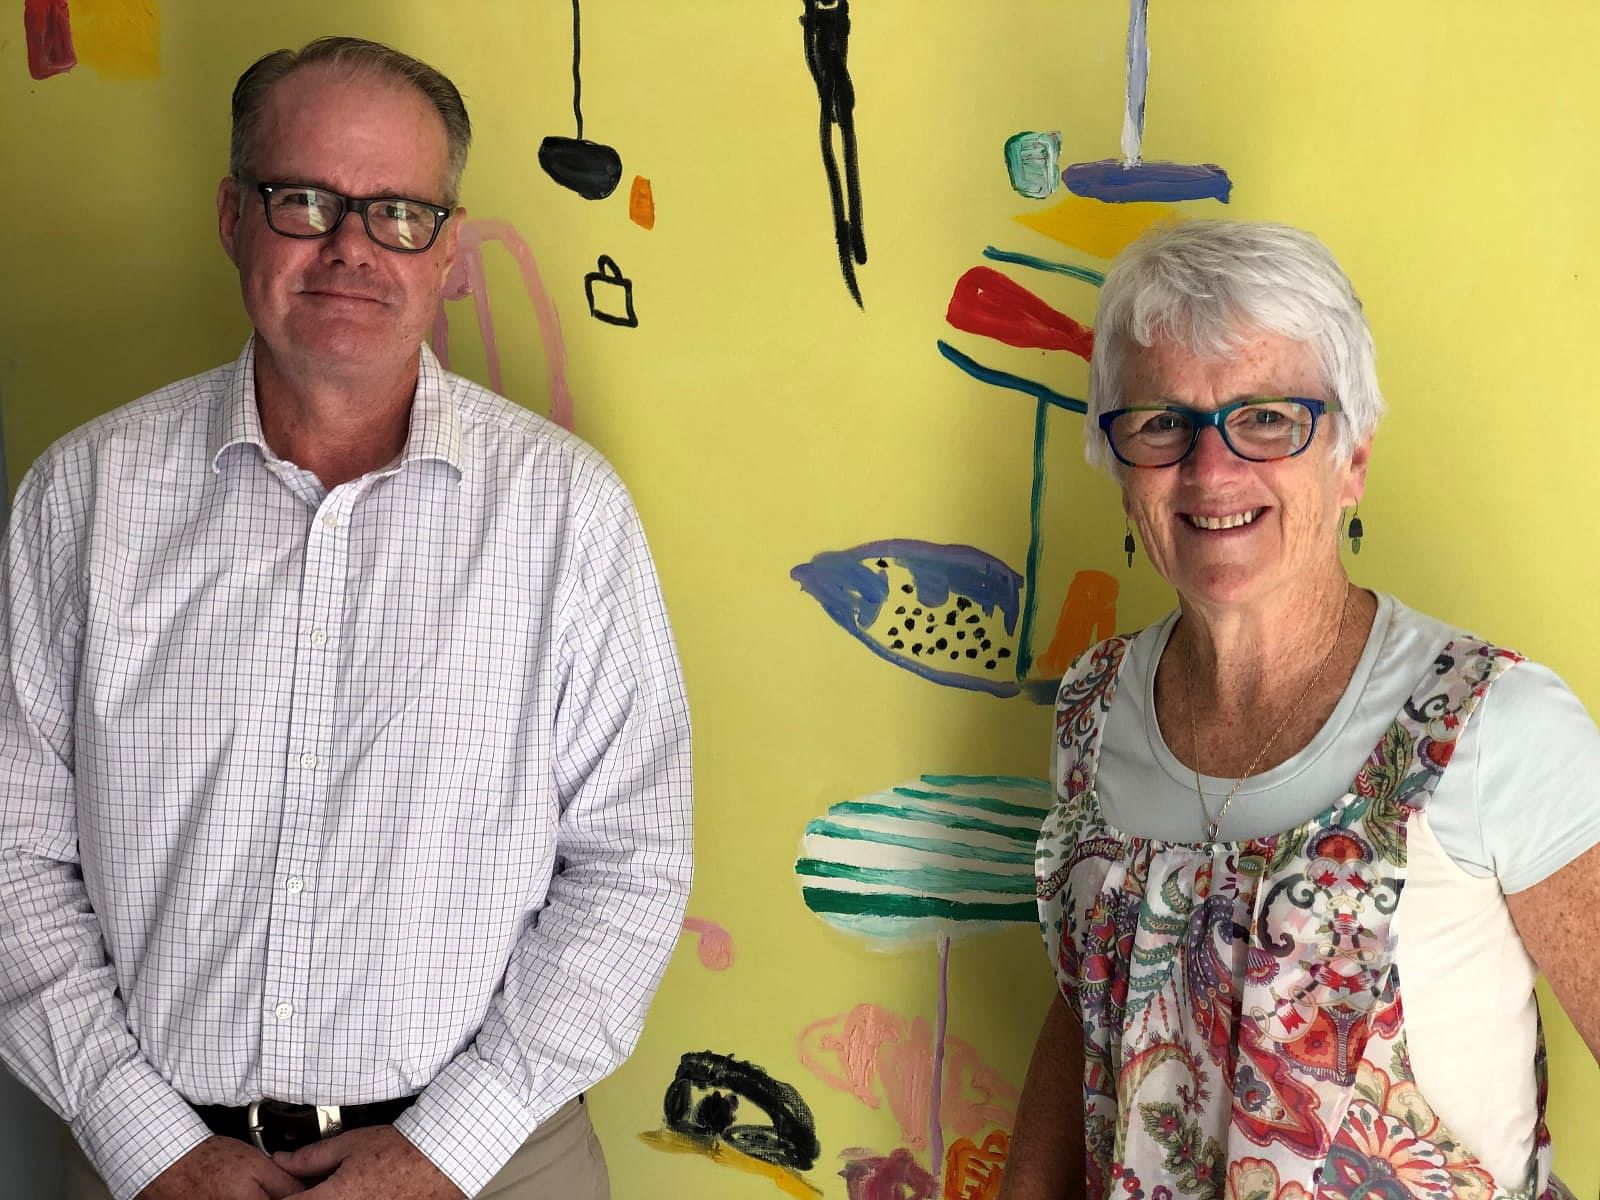  Chris Horsburgh, Project Lead for Council's Recovery, Rebuilding and Resilience Program pictured with Anne Leydon, Council's Health and Wellbeing Recovery Manager.